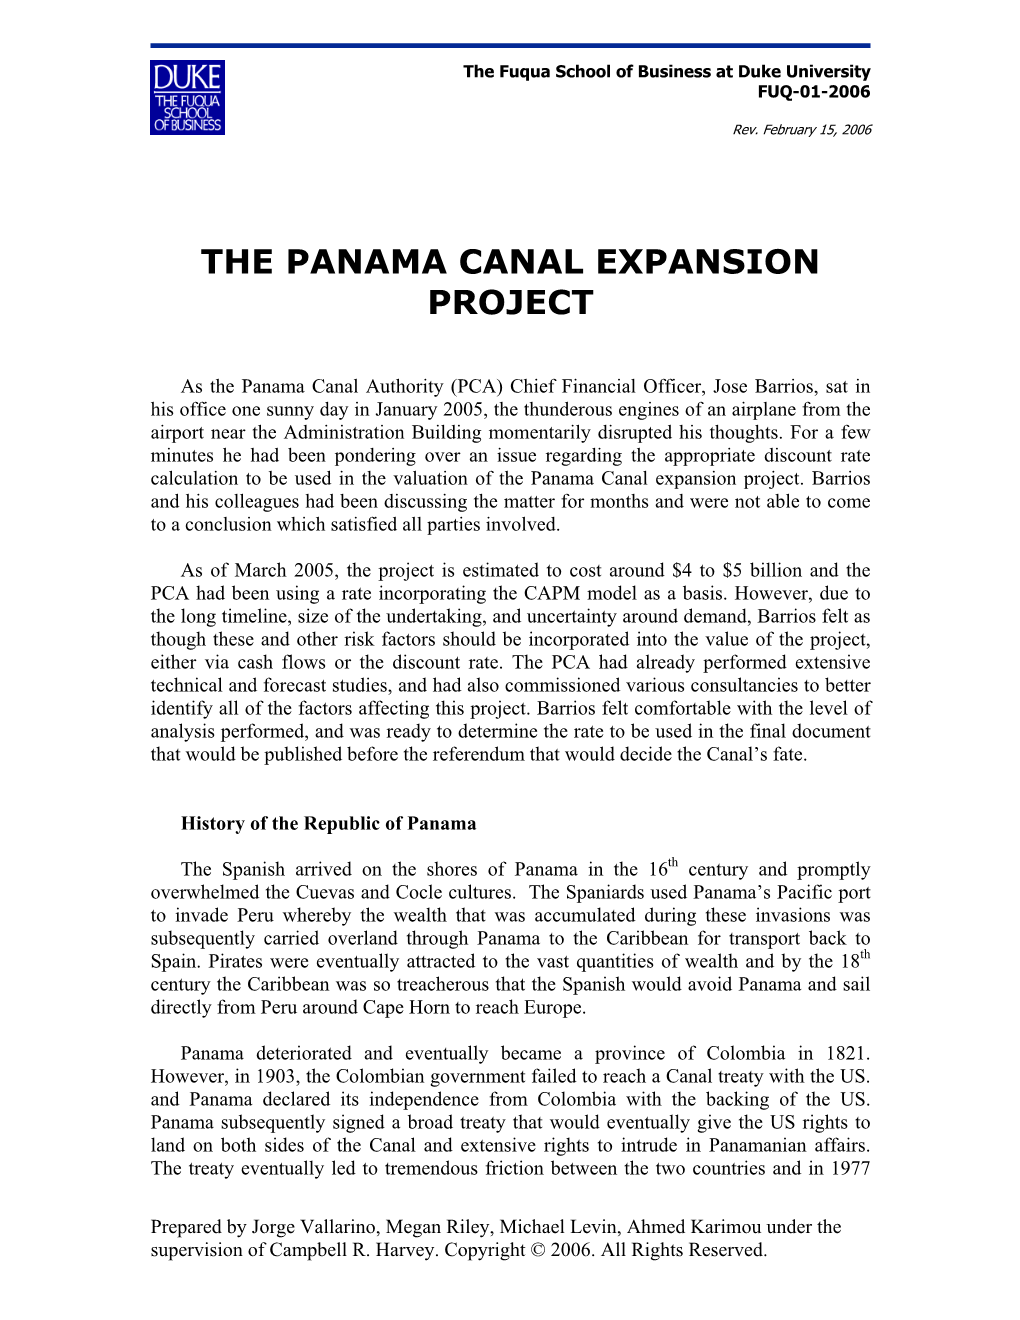 The Panama Canal Expansion Project